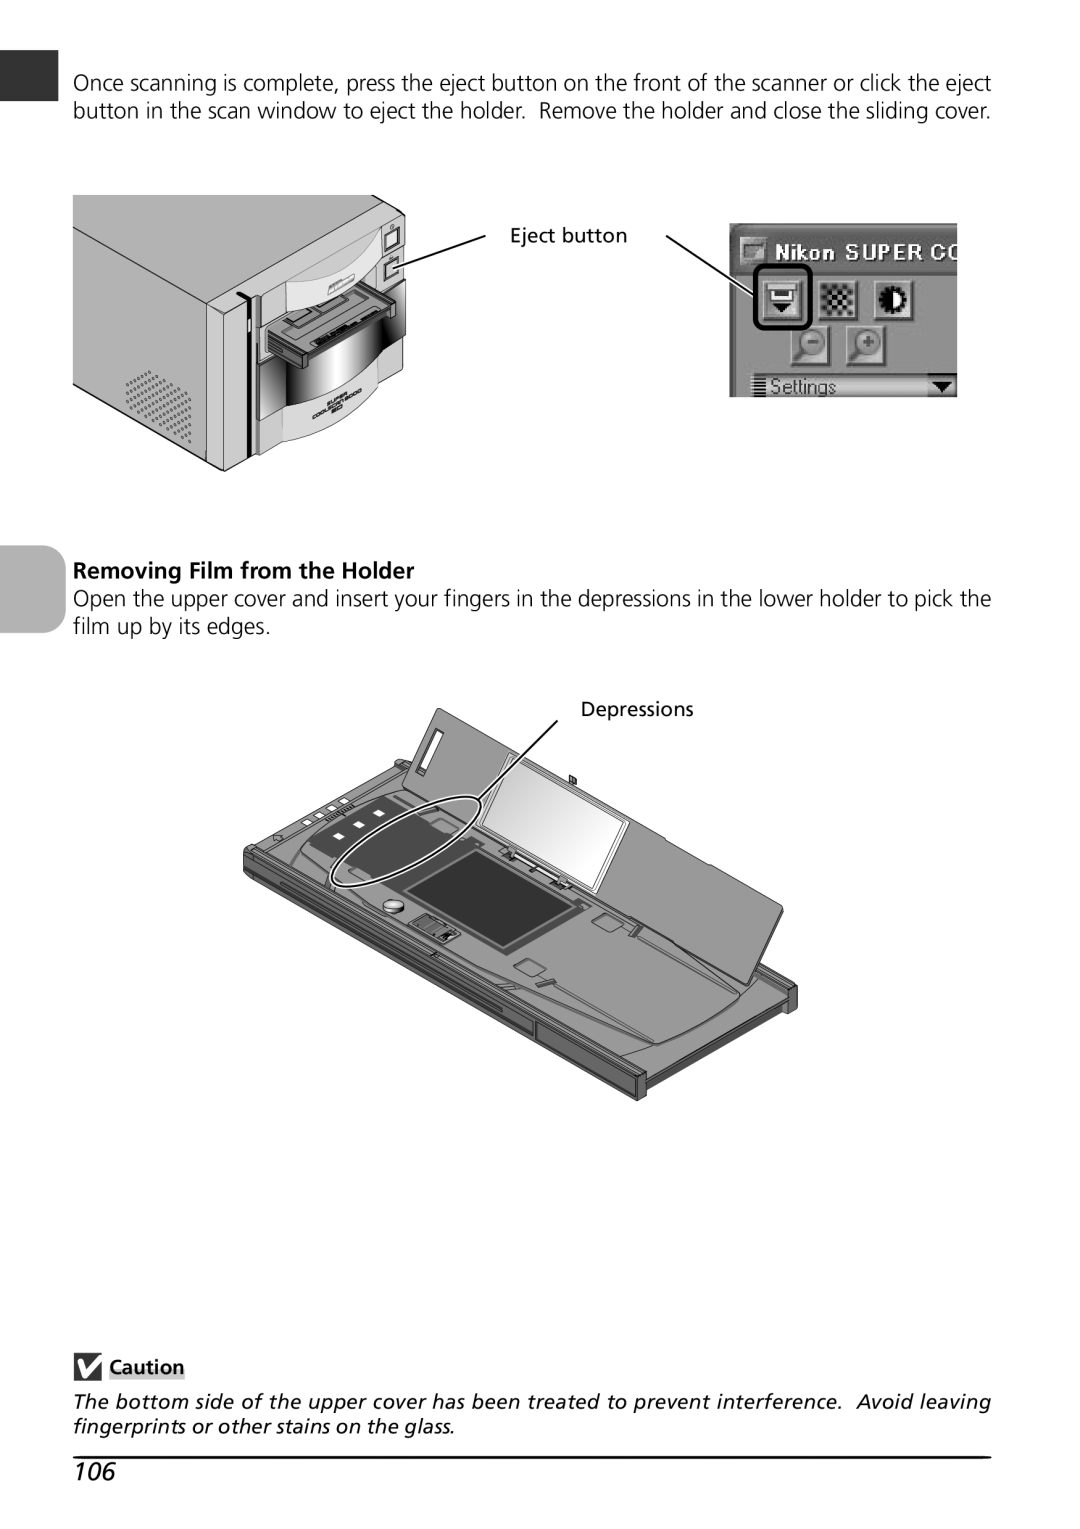 Nikon LS8000 user manual Removing Film from the Holder, Eject button 